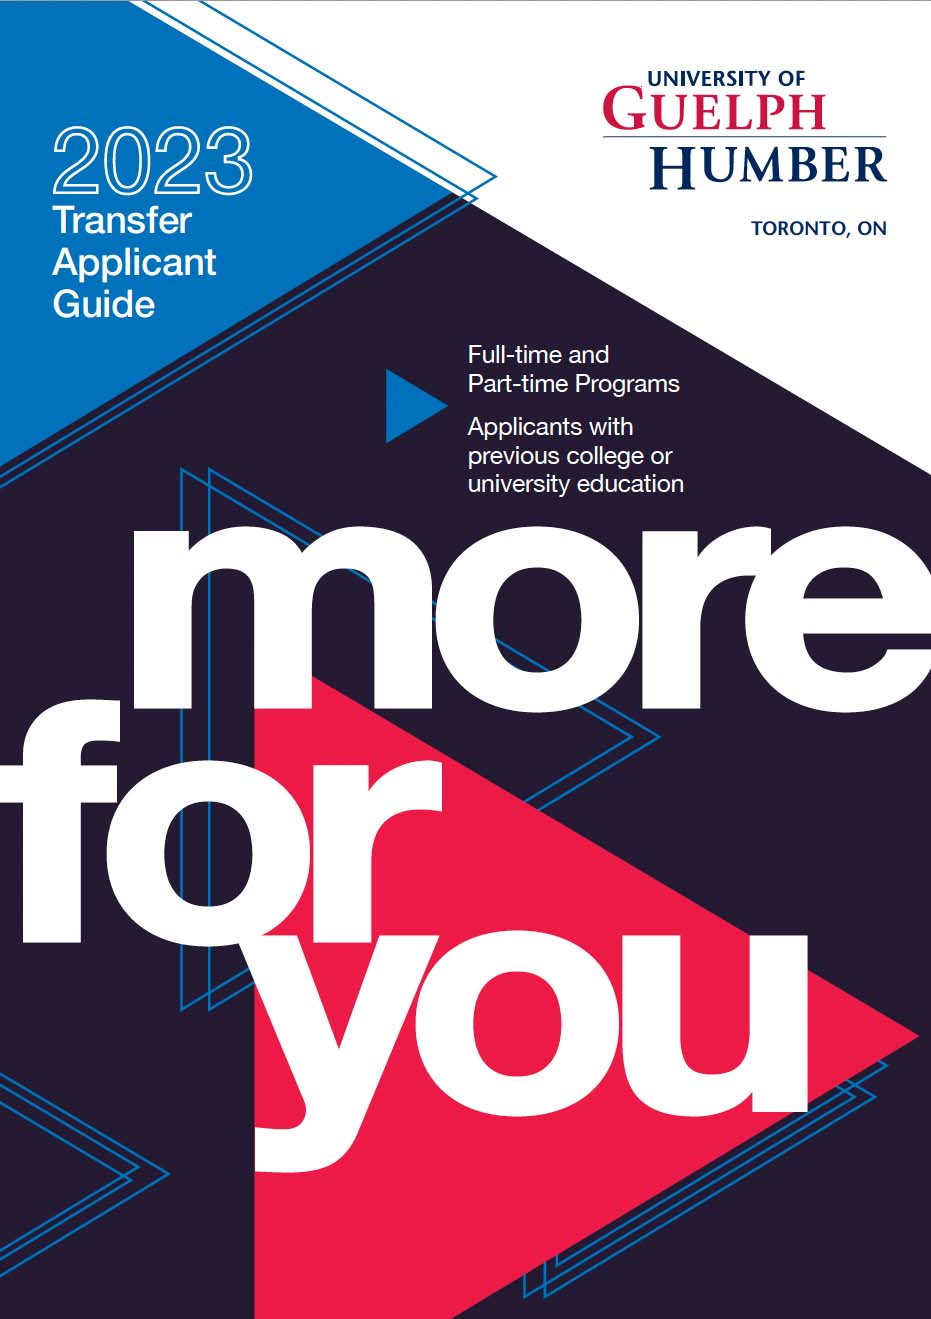 Cover page of Transfer Applicant Guide